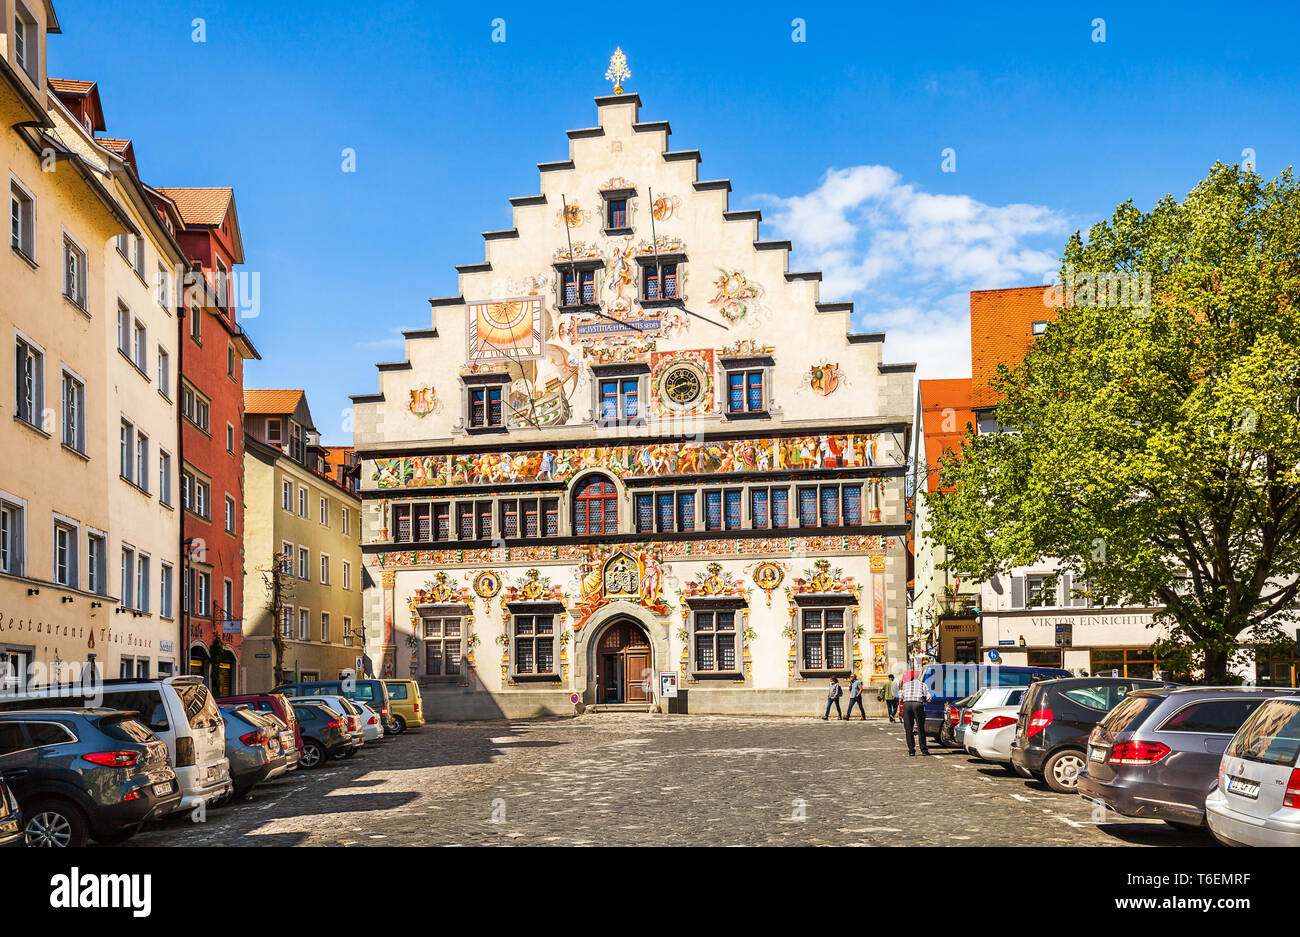 The old town hall in Lindau Stock Photo